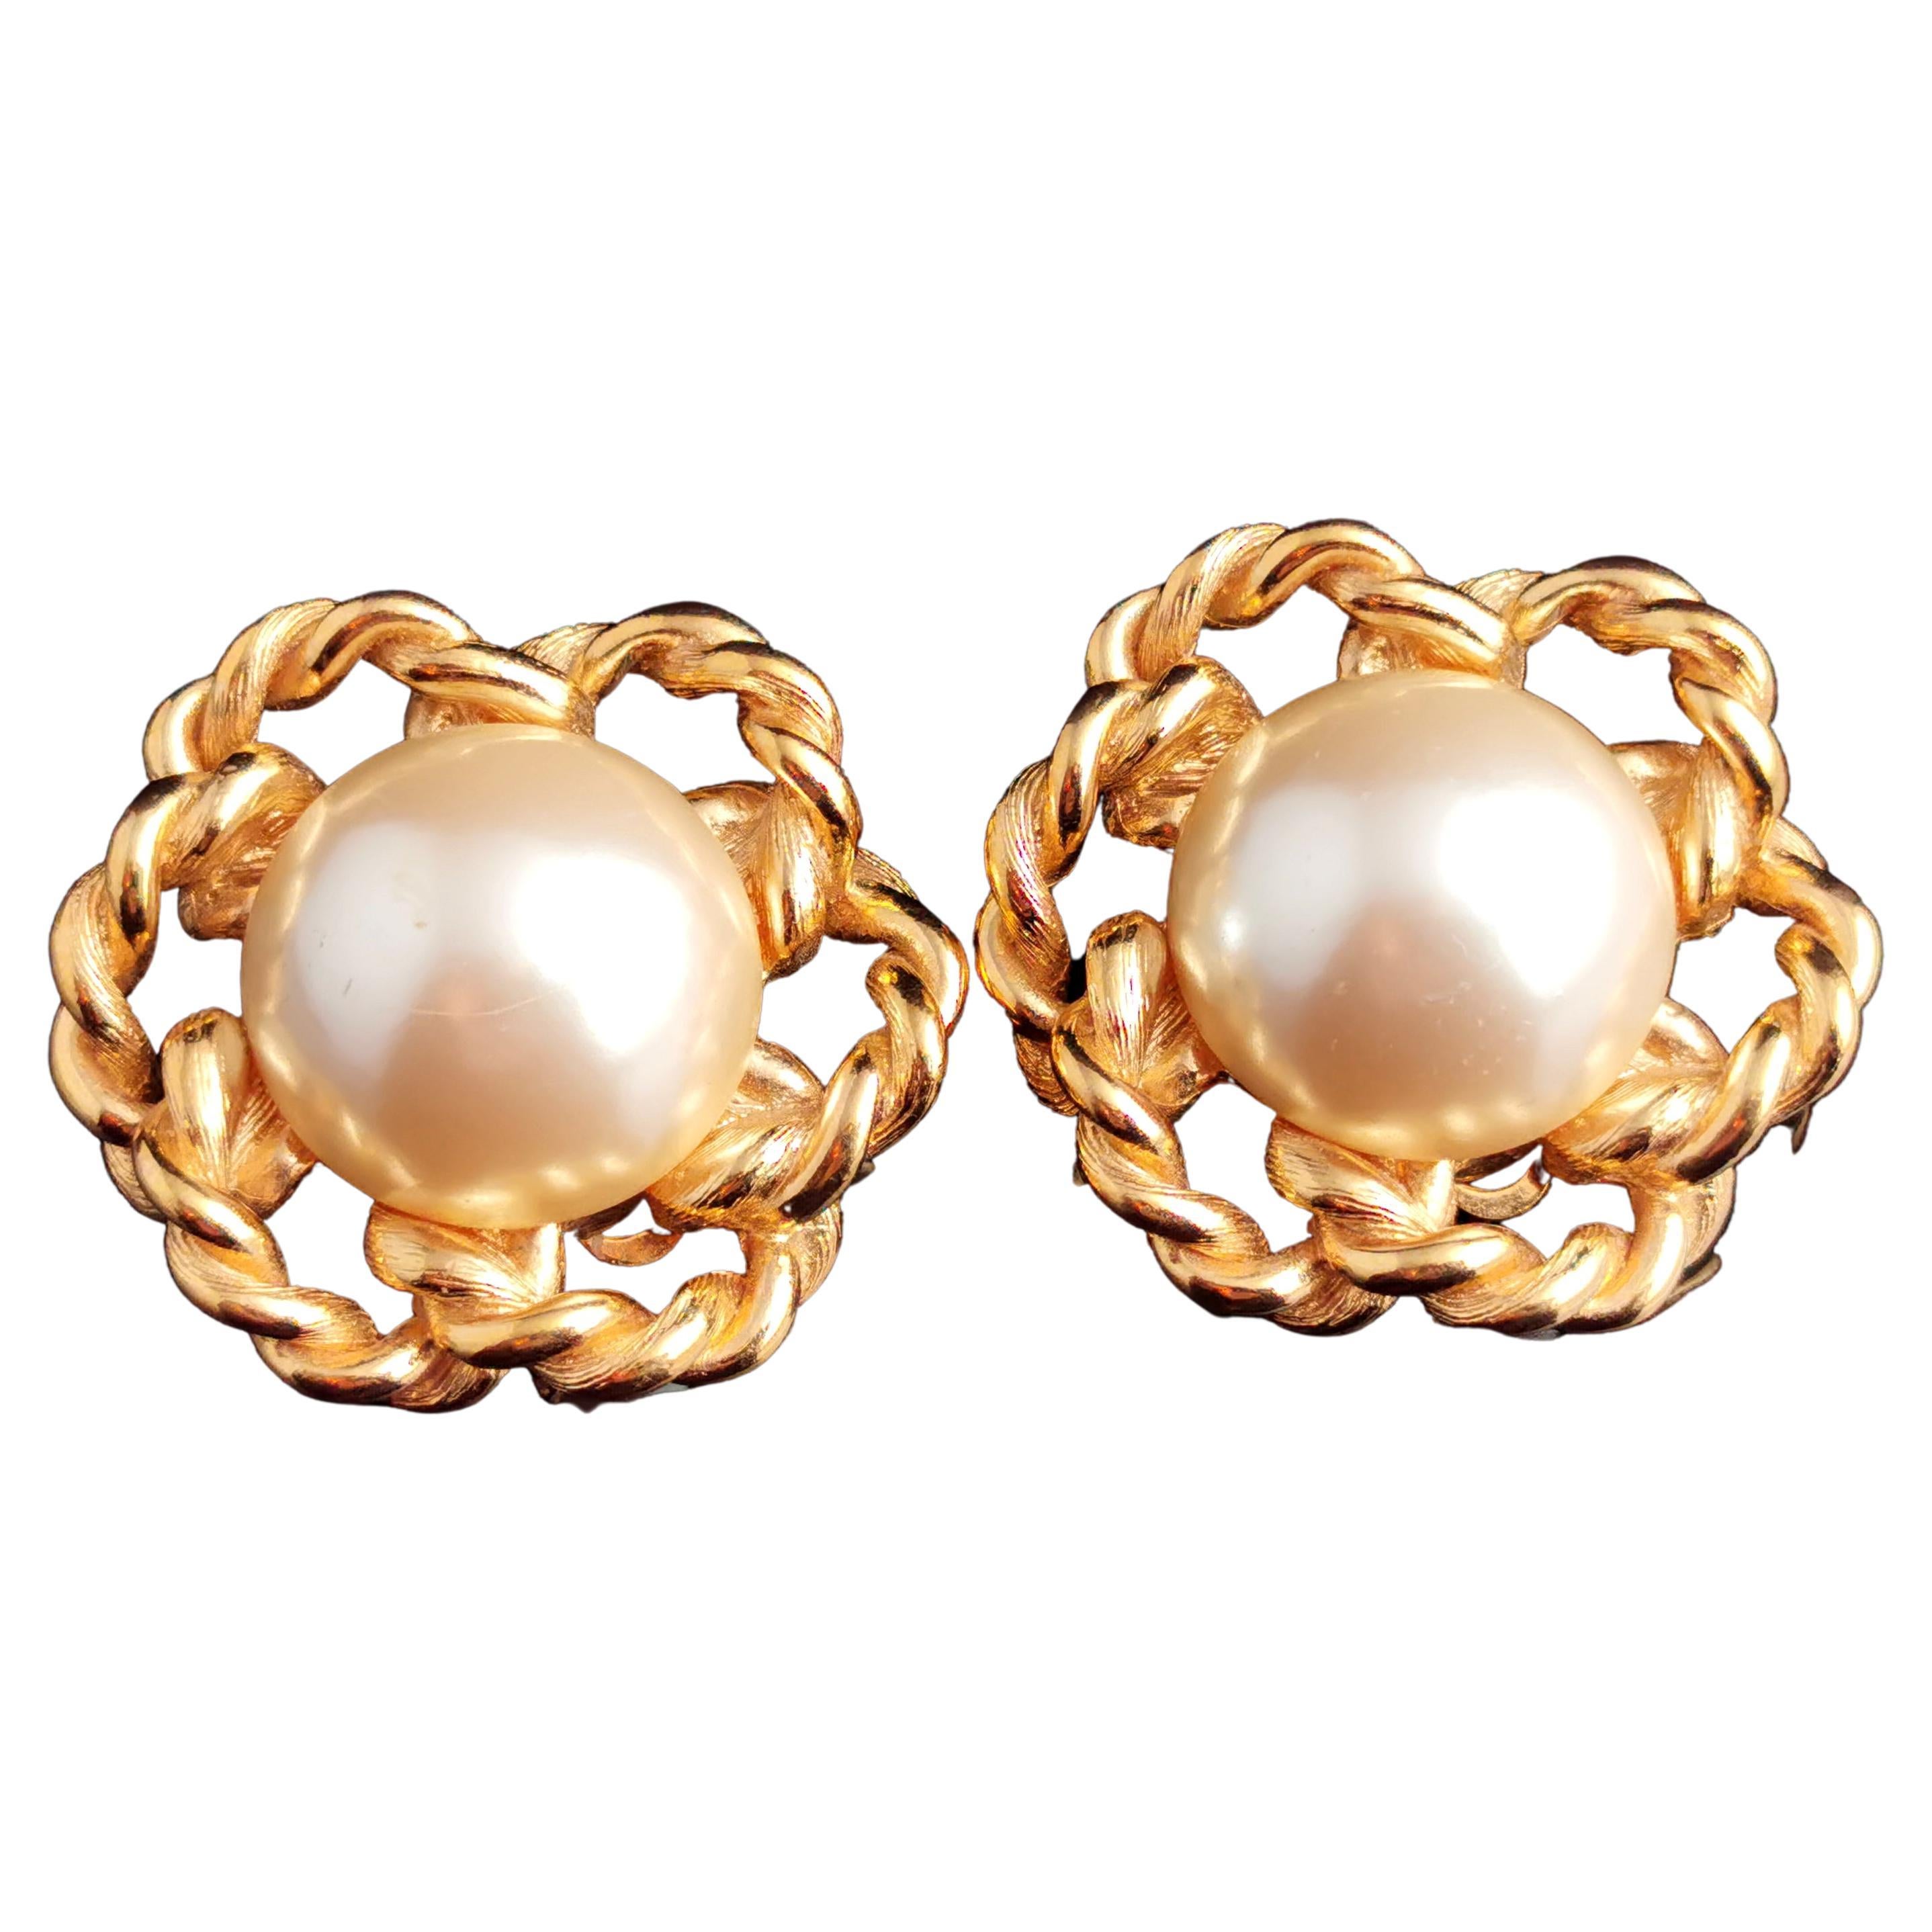 Vintage Givenchy faux pearl clip on earrings, Gold tone, c1980s  For Sale